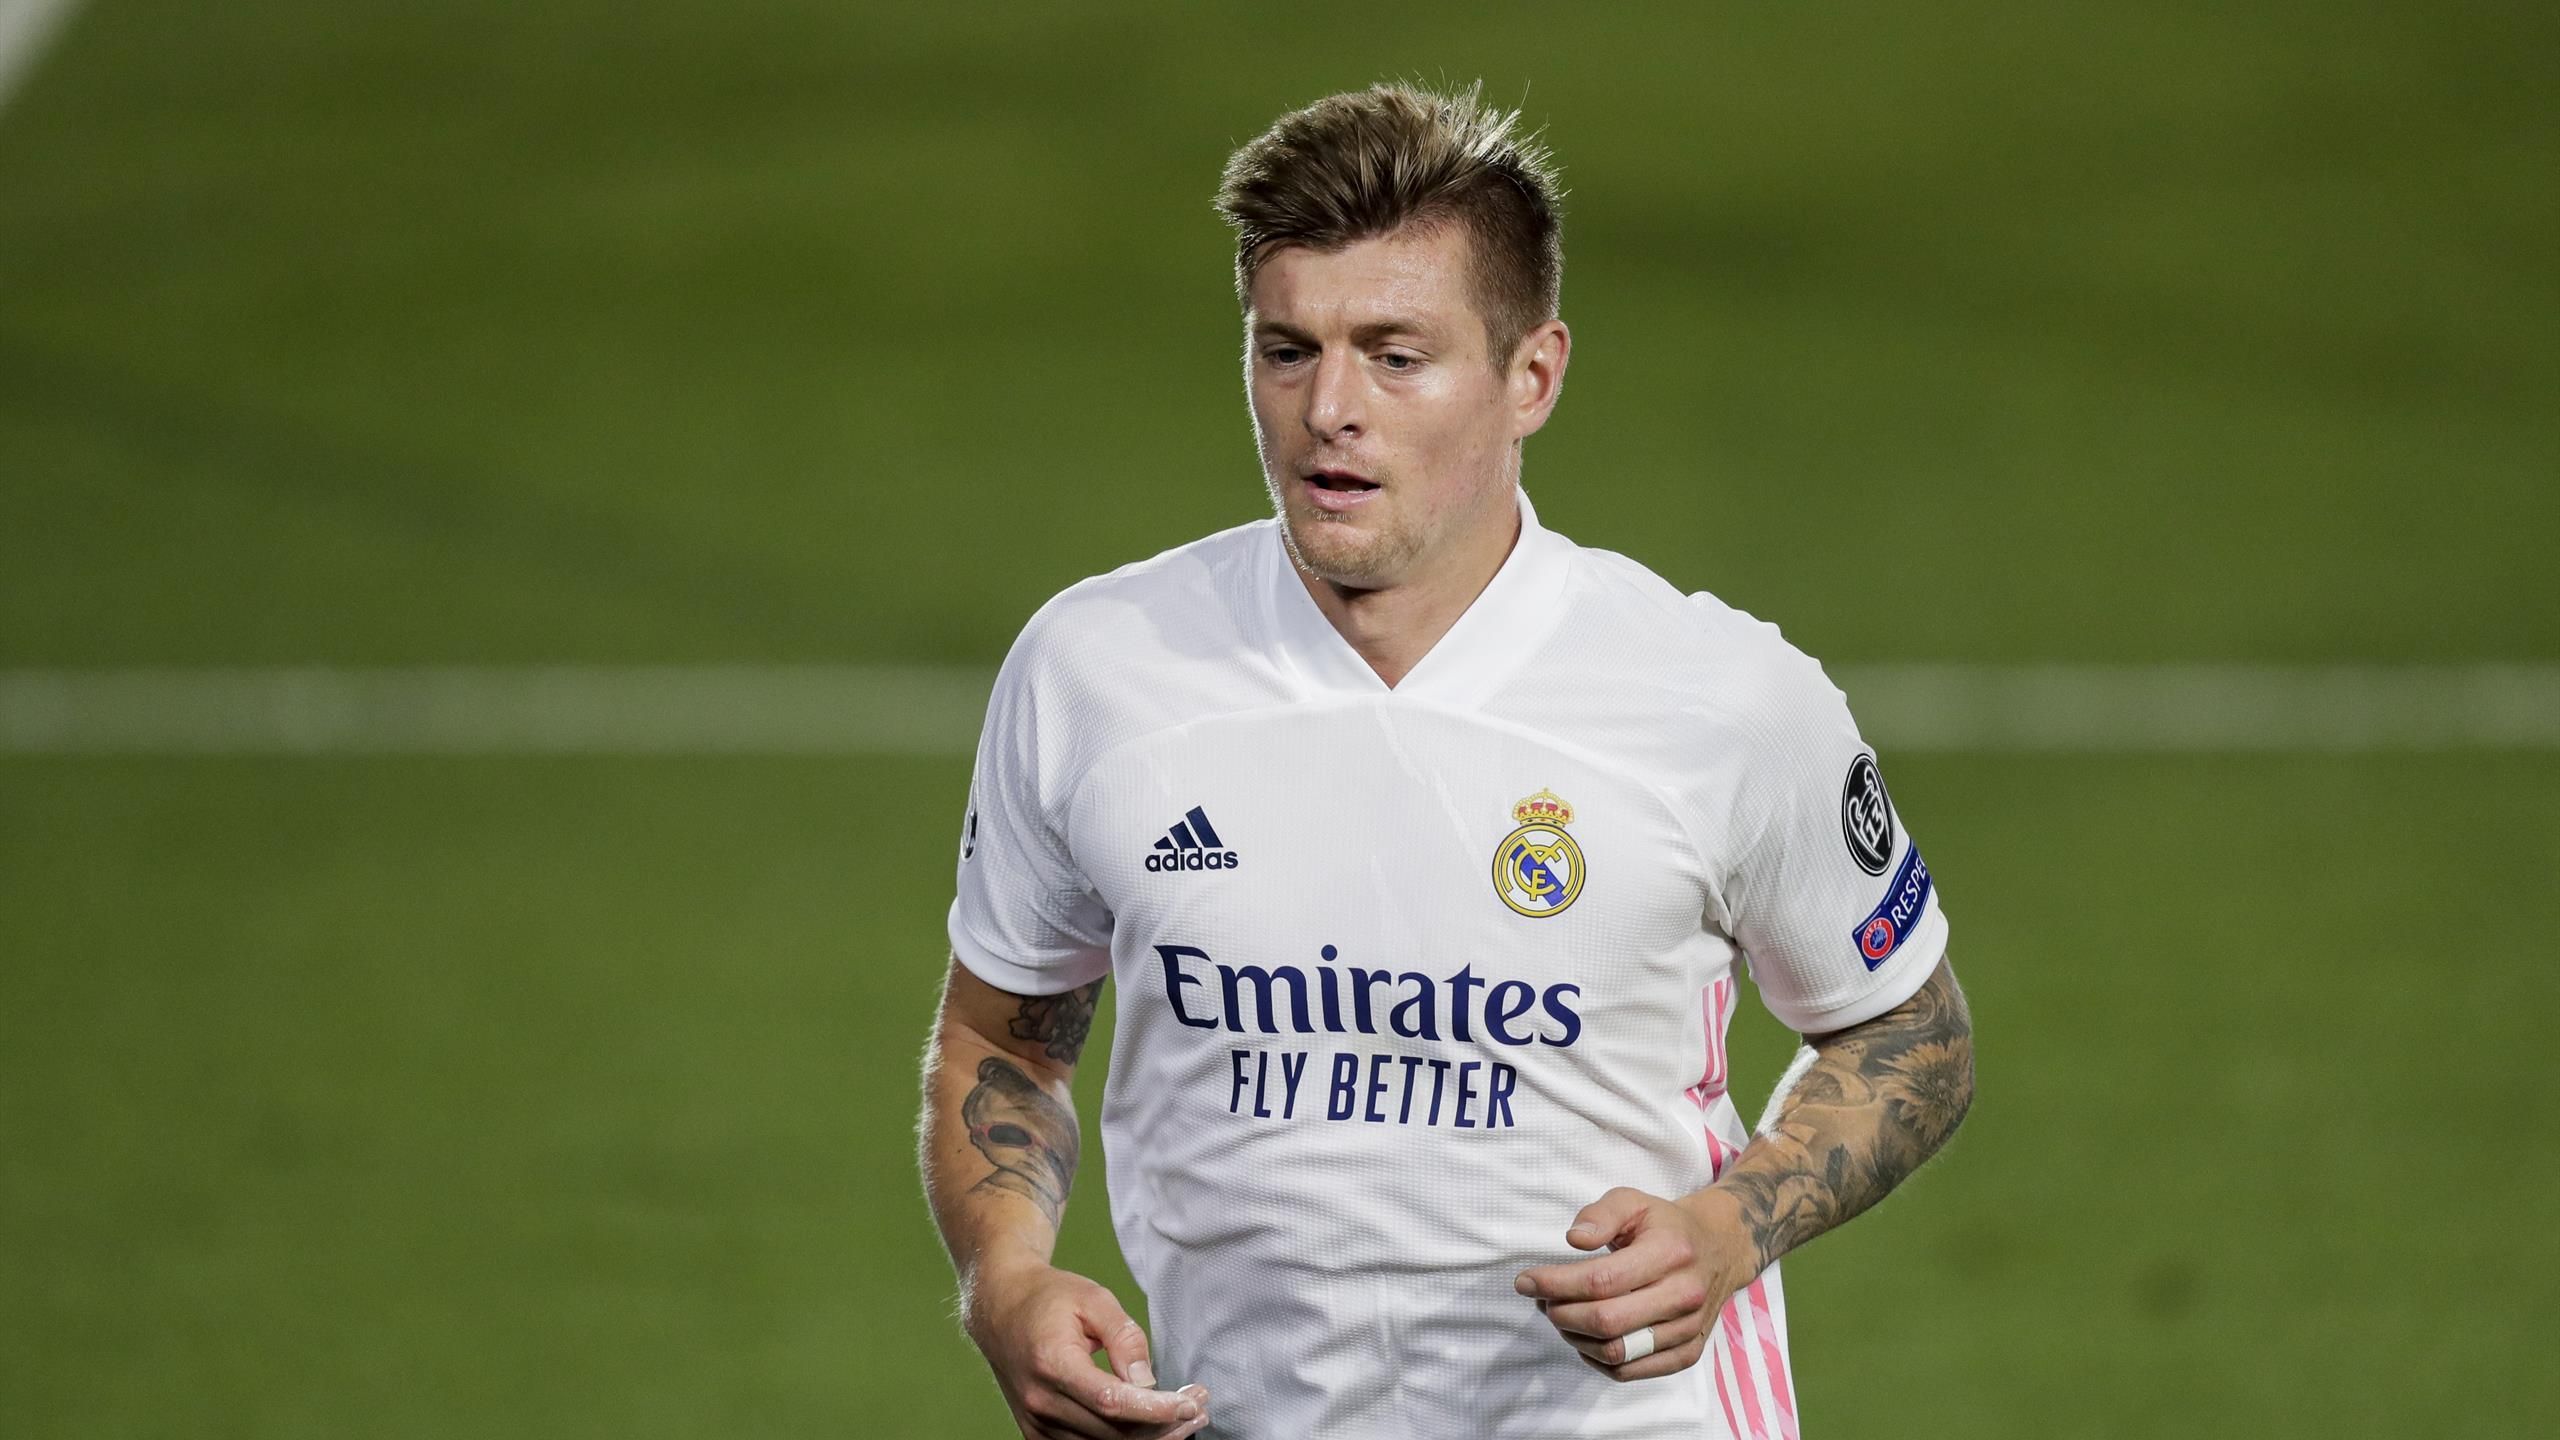 Toni Kroos: Real Madrid, Germany star slams new tournaments, says players treated like 'puppets'